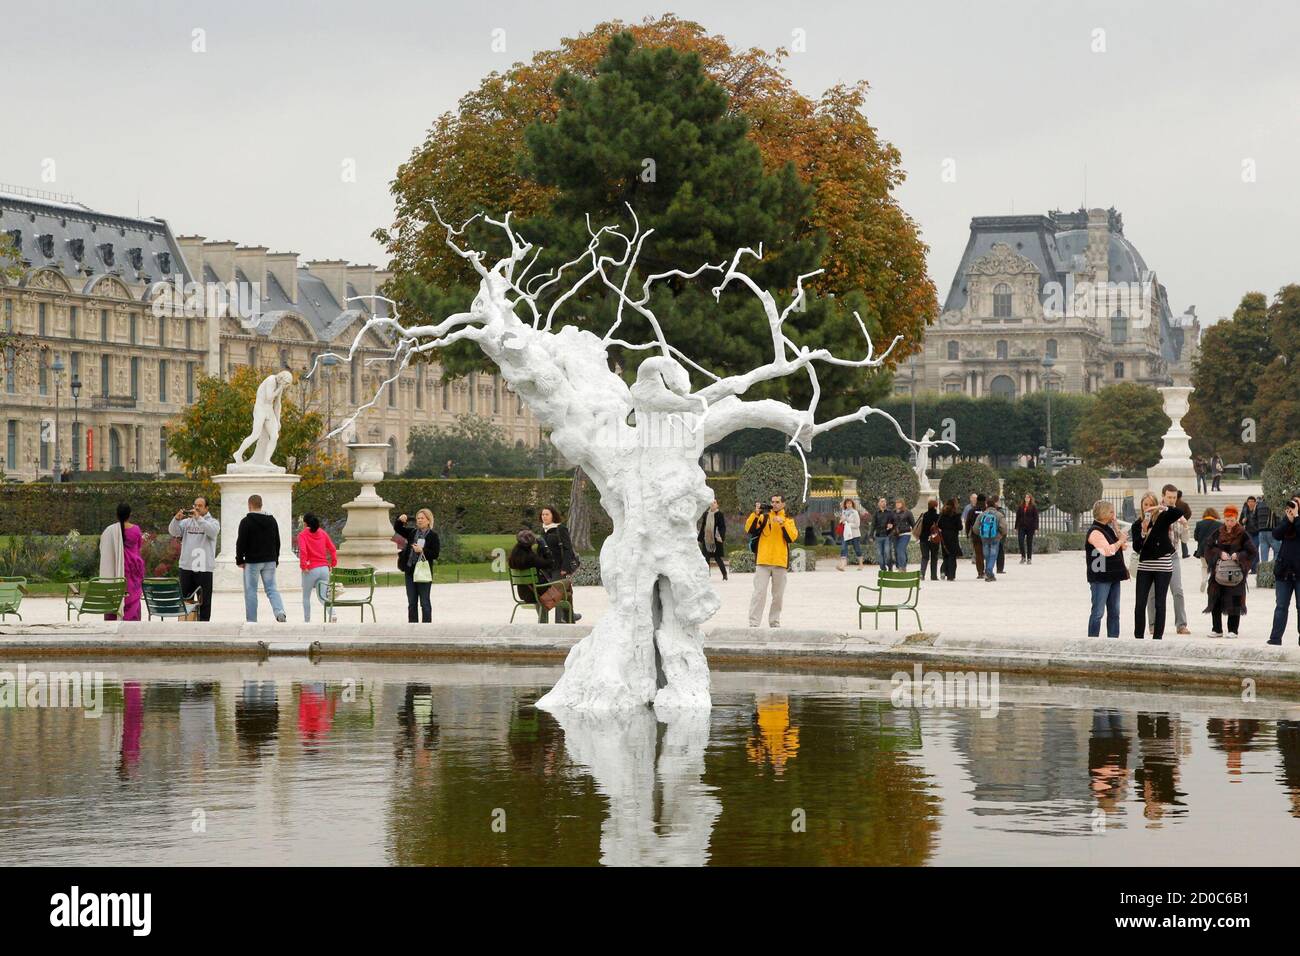 The sculpture 'Turn back time, let's start this day again' (2009) by Swiss artist Ugo Rondinone is displayed in the Tuileries Garden in Paris October 15, 2010. The exhibit is part of the International Contemporary Art Fair (FIAC) which runs from October 21 - 24 in the French capital.   REUTERS/Benoit Tessier (FRANCE - Tags: SOCIETY) Stock Photo